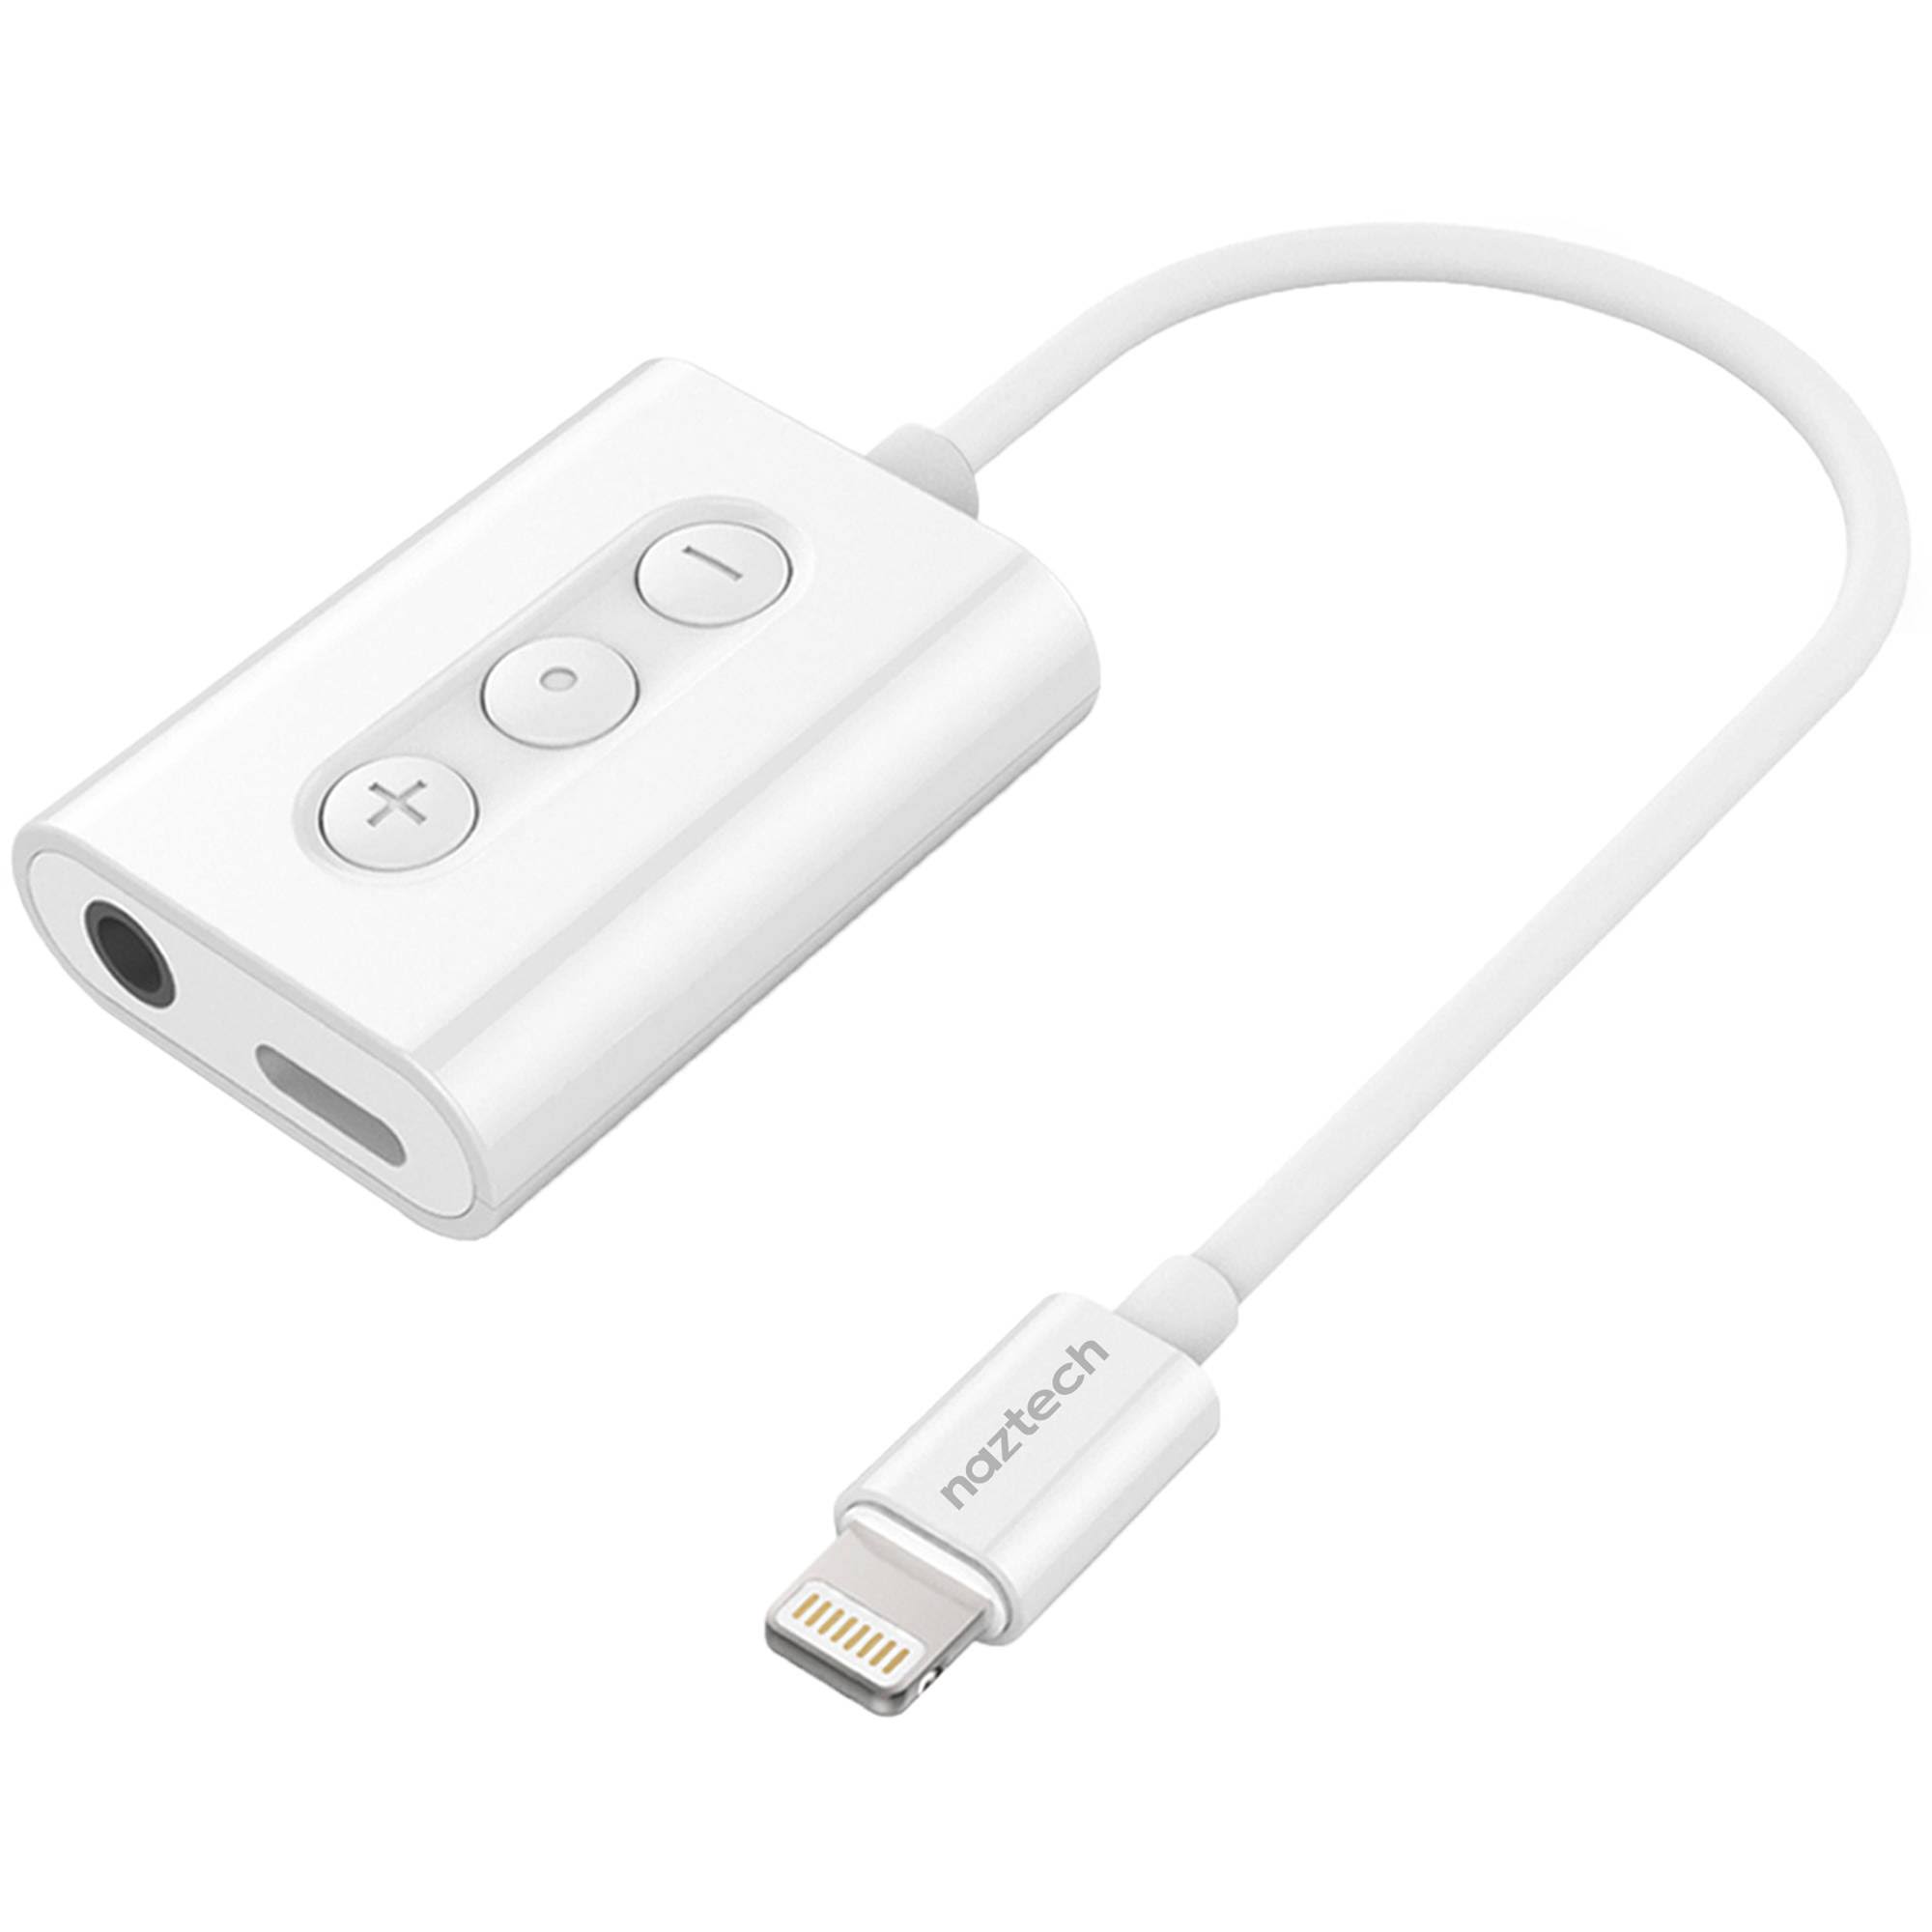 Naztech Audio & Charge Adapter - 3.5mm, With Lightning Connector